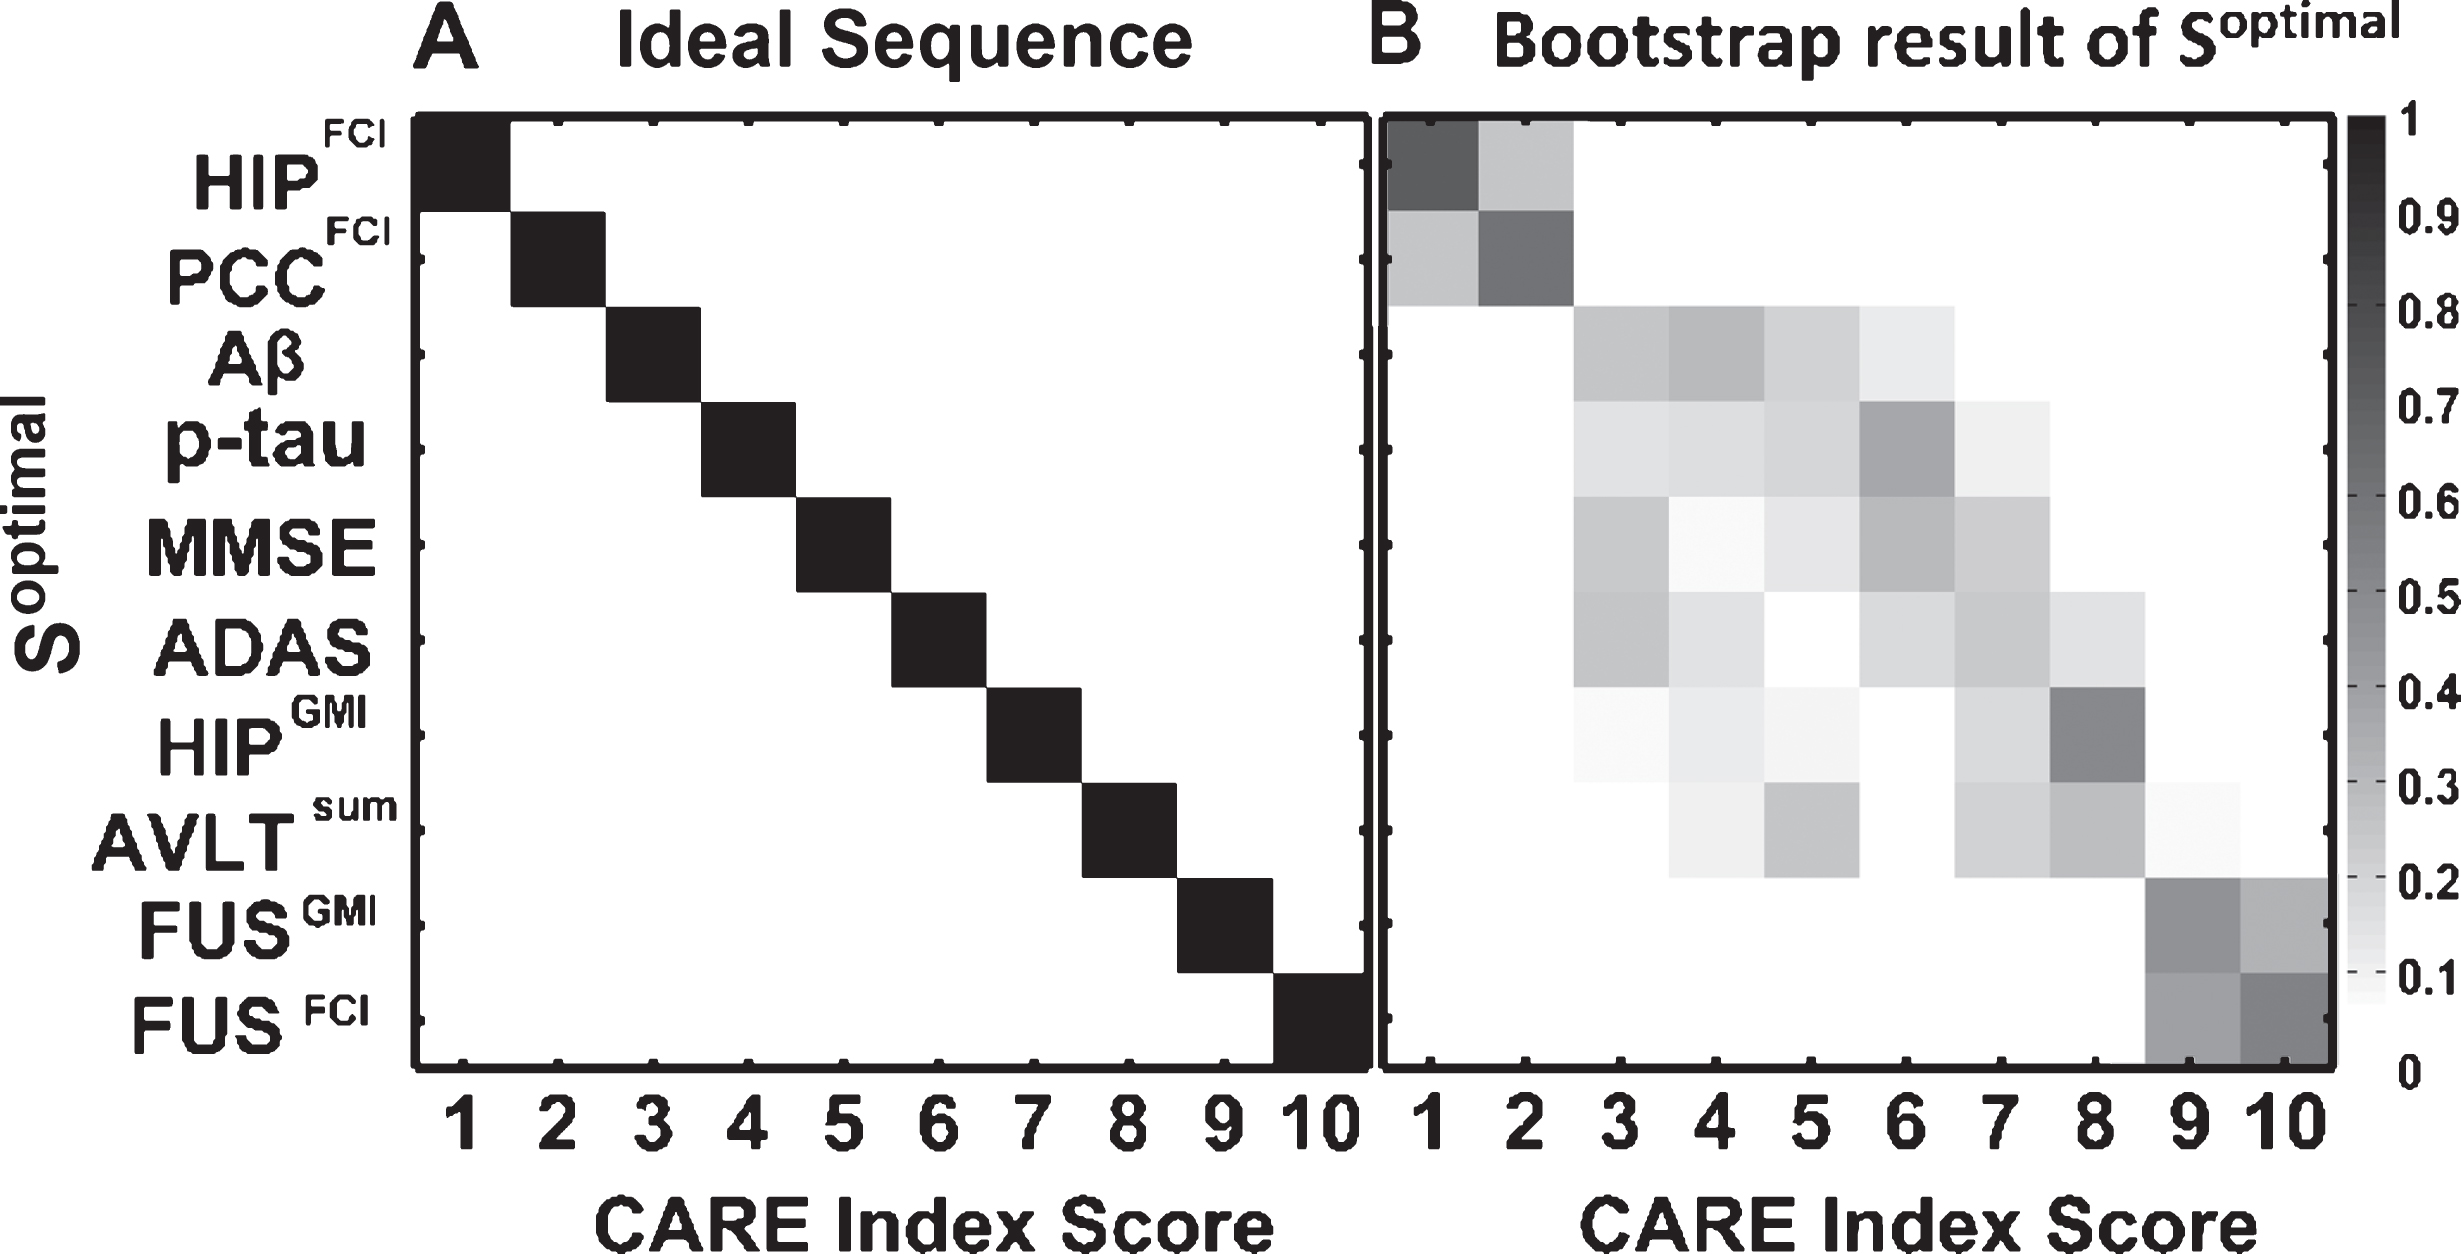 Optimal temporal order, Soptimal, of the 10 AD biomarkers estimated by the EBP model. A) The y-axis shows the Soptimal and the x-axis shows the CARE index score at which the corresponding event occurred. B) Bootstrap cross-validation of the Soptimal. Each entry in the matrix represents the proportion of the Soptimal during 500 bootstrap samples. The proportion values range from 0 to 1 and correspond to color, from white to black. The CARE index scores with their corresponding biomarkers follow: 1, increased HIPFCI; 2, decreased PCCFCI; 3, decreased Aβ concentration; 4, increased p-tau concentration; 5, decreased MMSE score; 6, increased ADAS score; 7, decreased HIPGMI; 8, decreased AVLT score; 9, decreased FUSGMI; 10, increased FUSFCI.